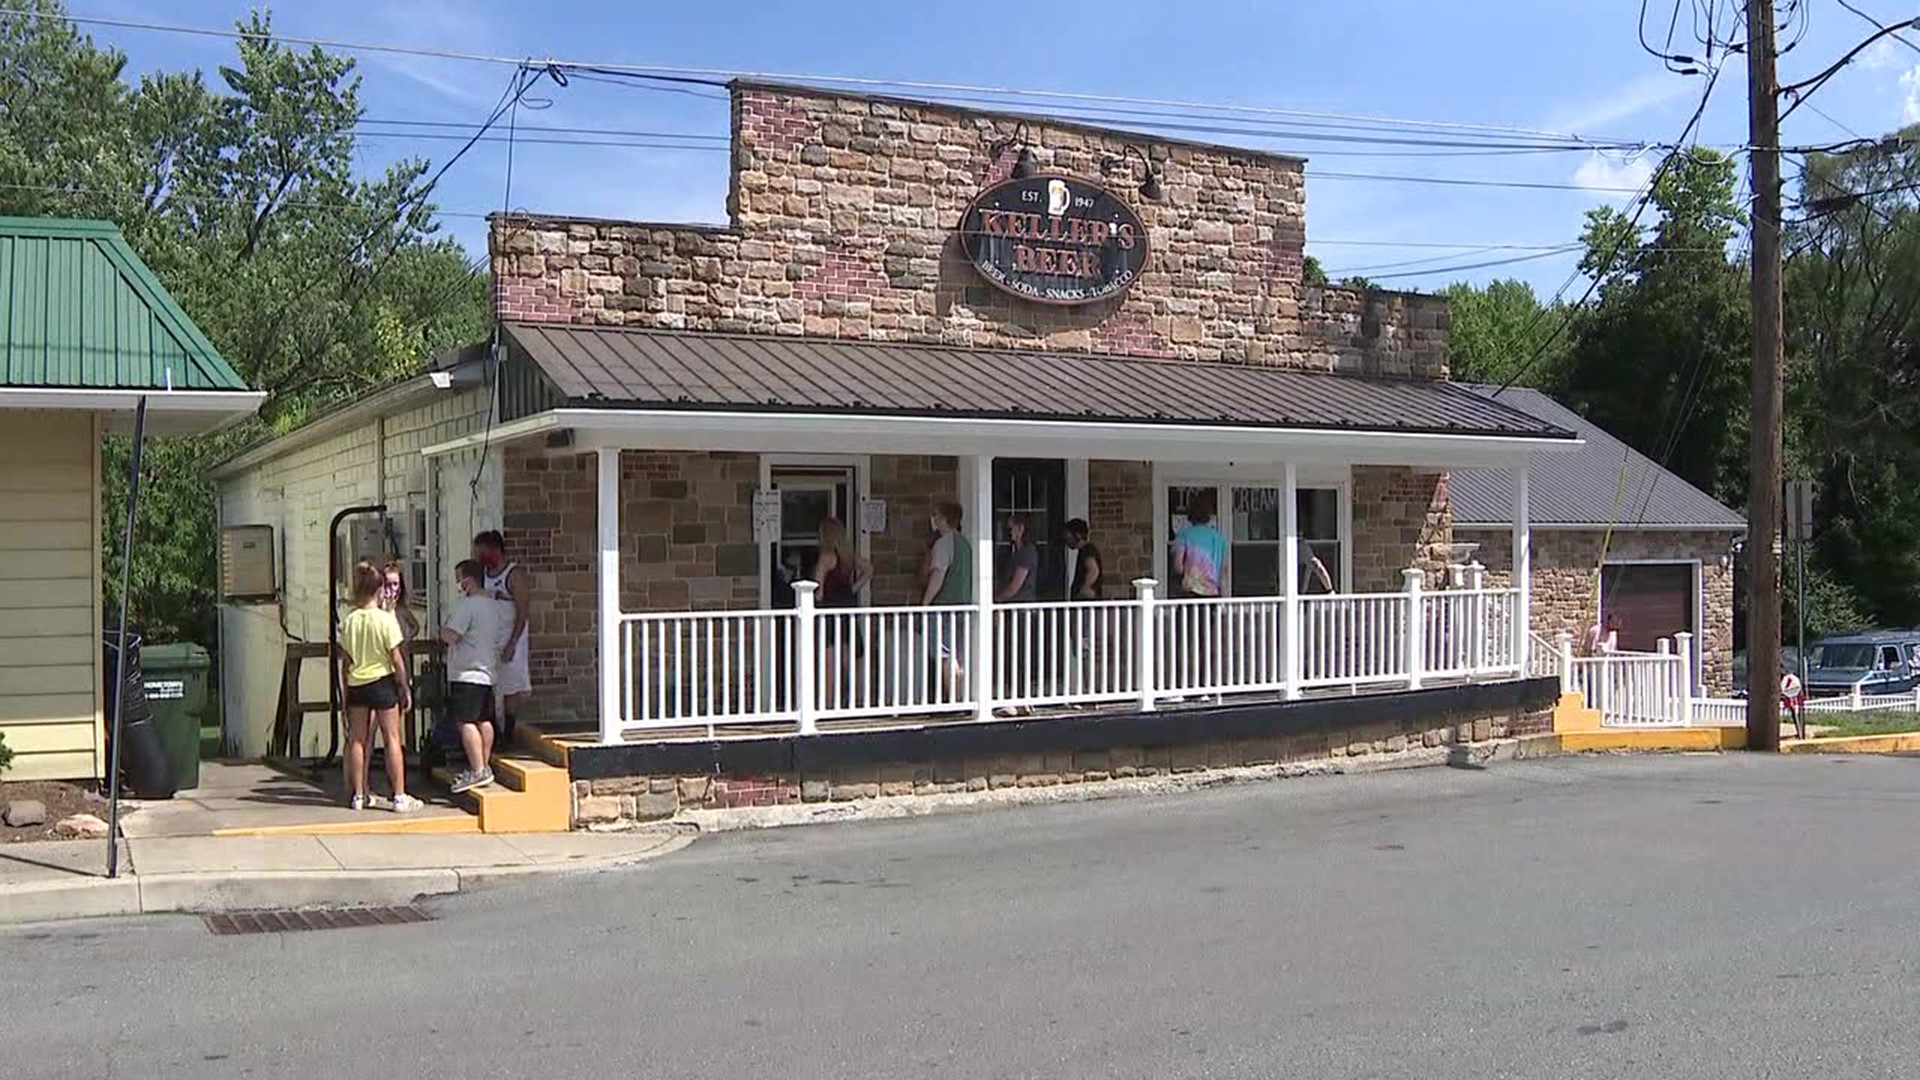 The family-owned ice cream shop has been a big hit in the community.